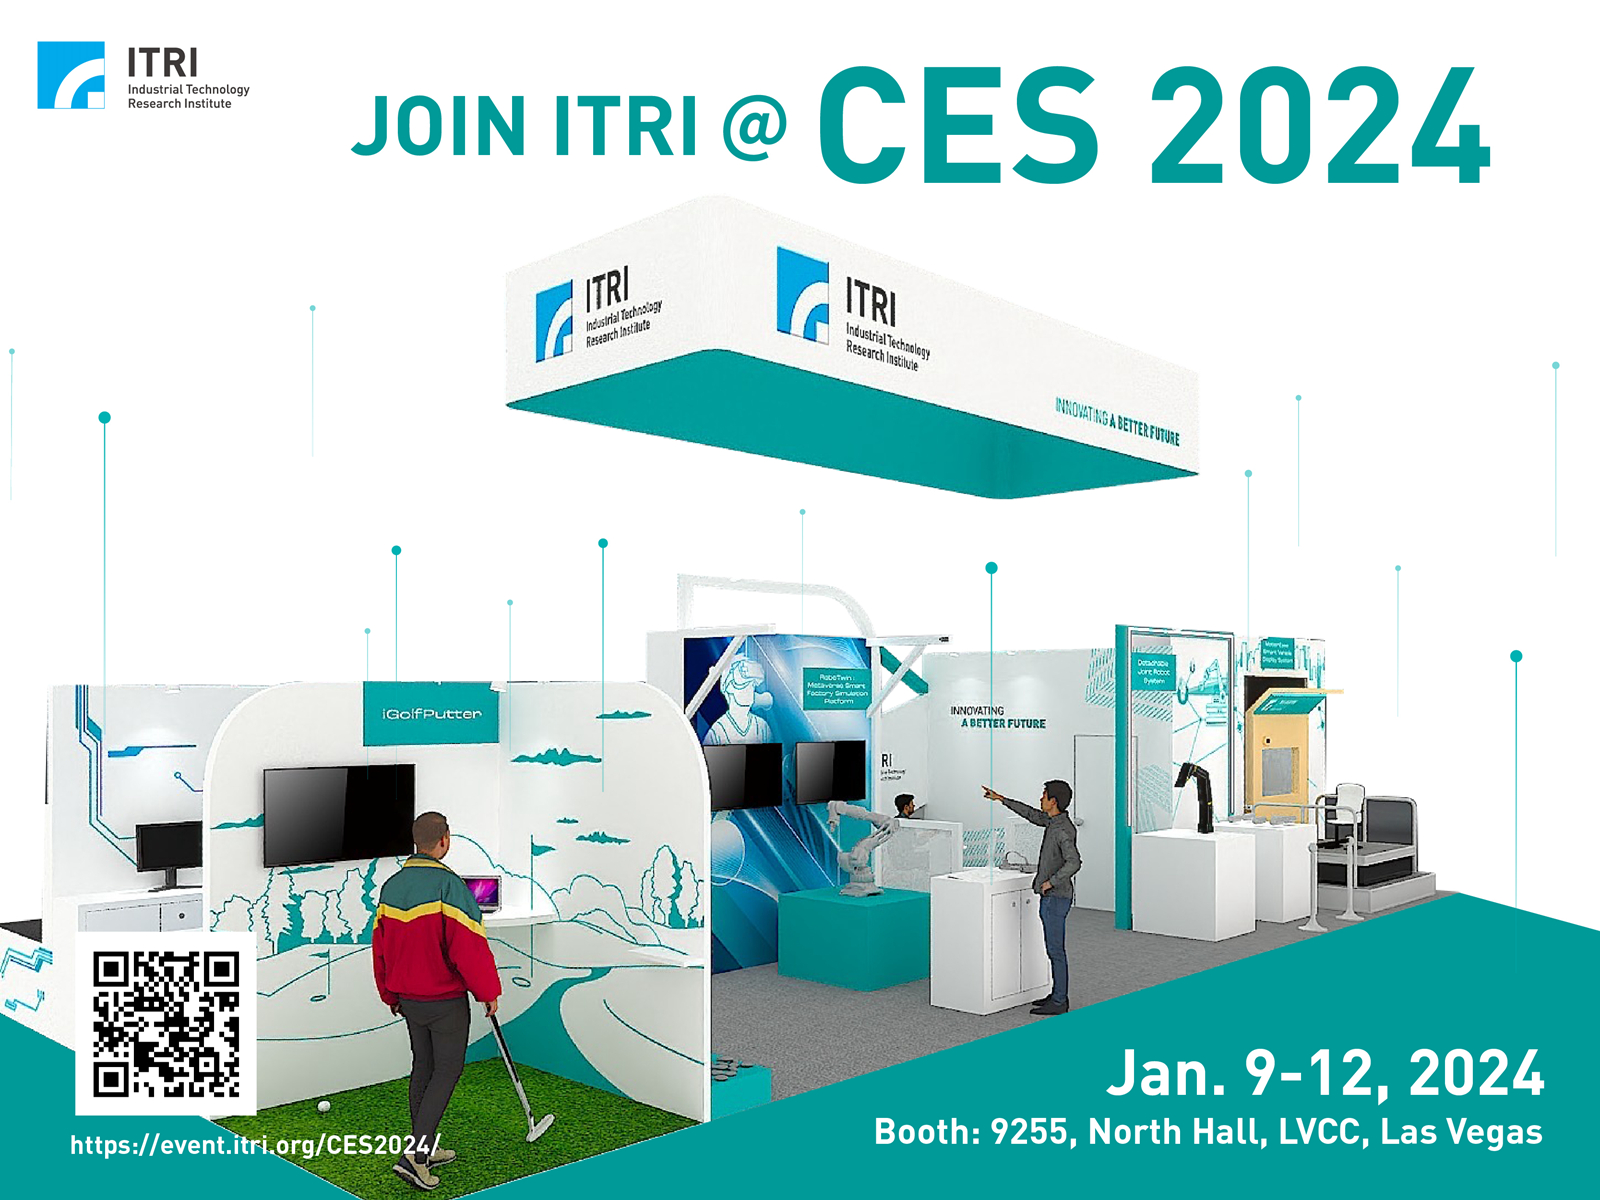 ITRI to Exhibit Innovations in Smart Sports, Digital Health, AI Display and Entertainment and AI Robotics at CES 2024 and CES Unveiled Las Vegas